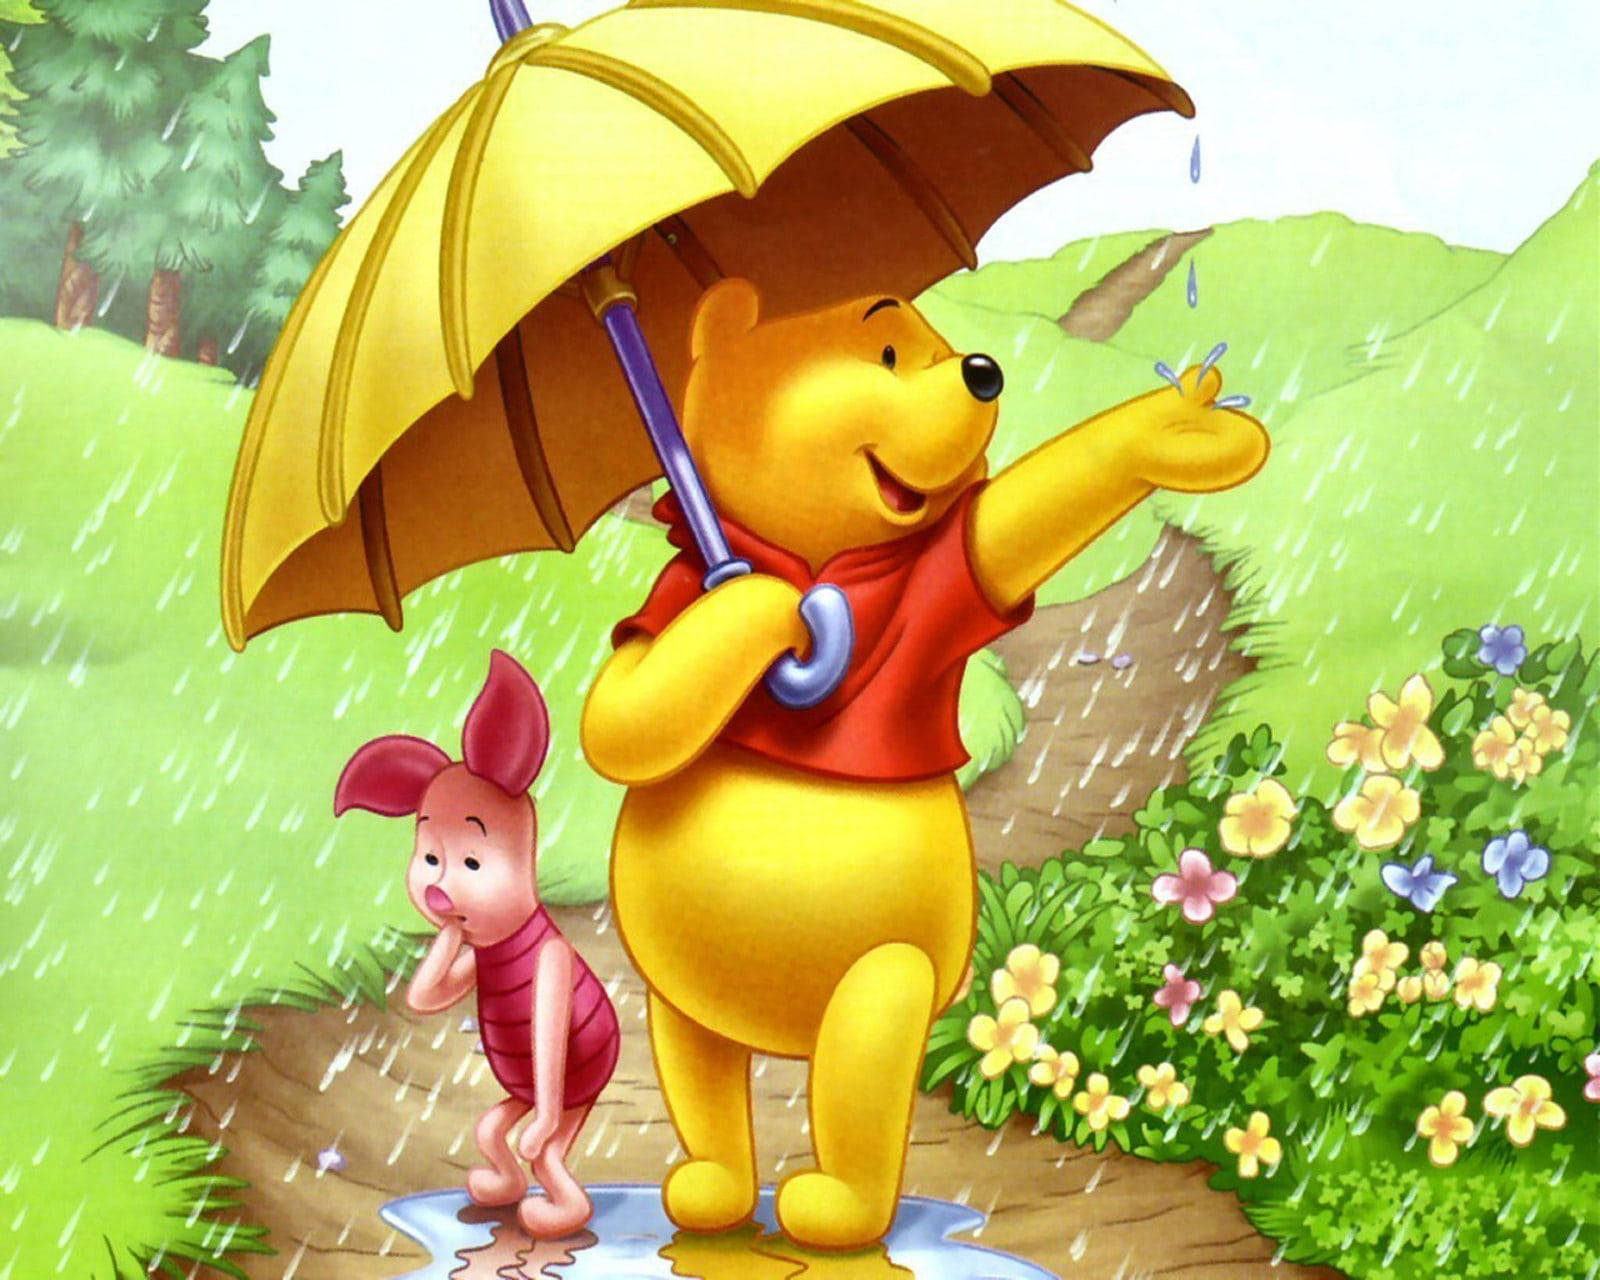 Cute Winnie The Pooh With Umbrella Background